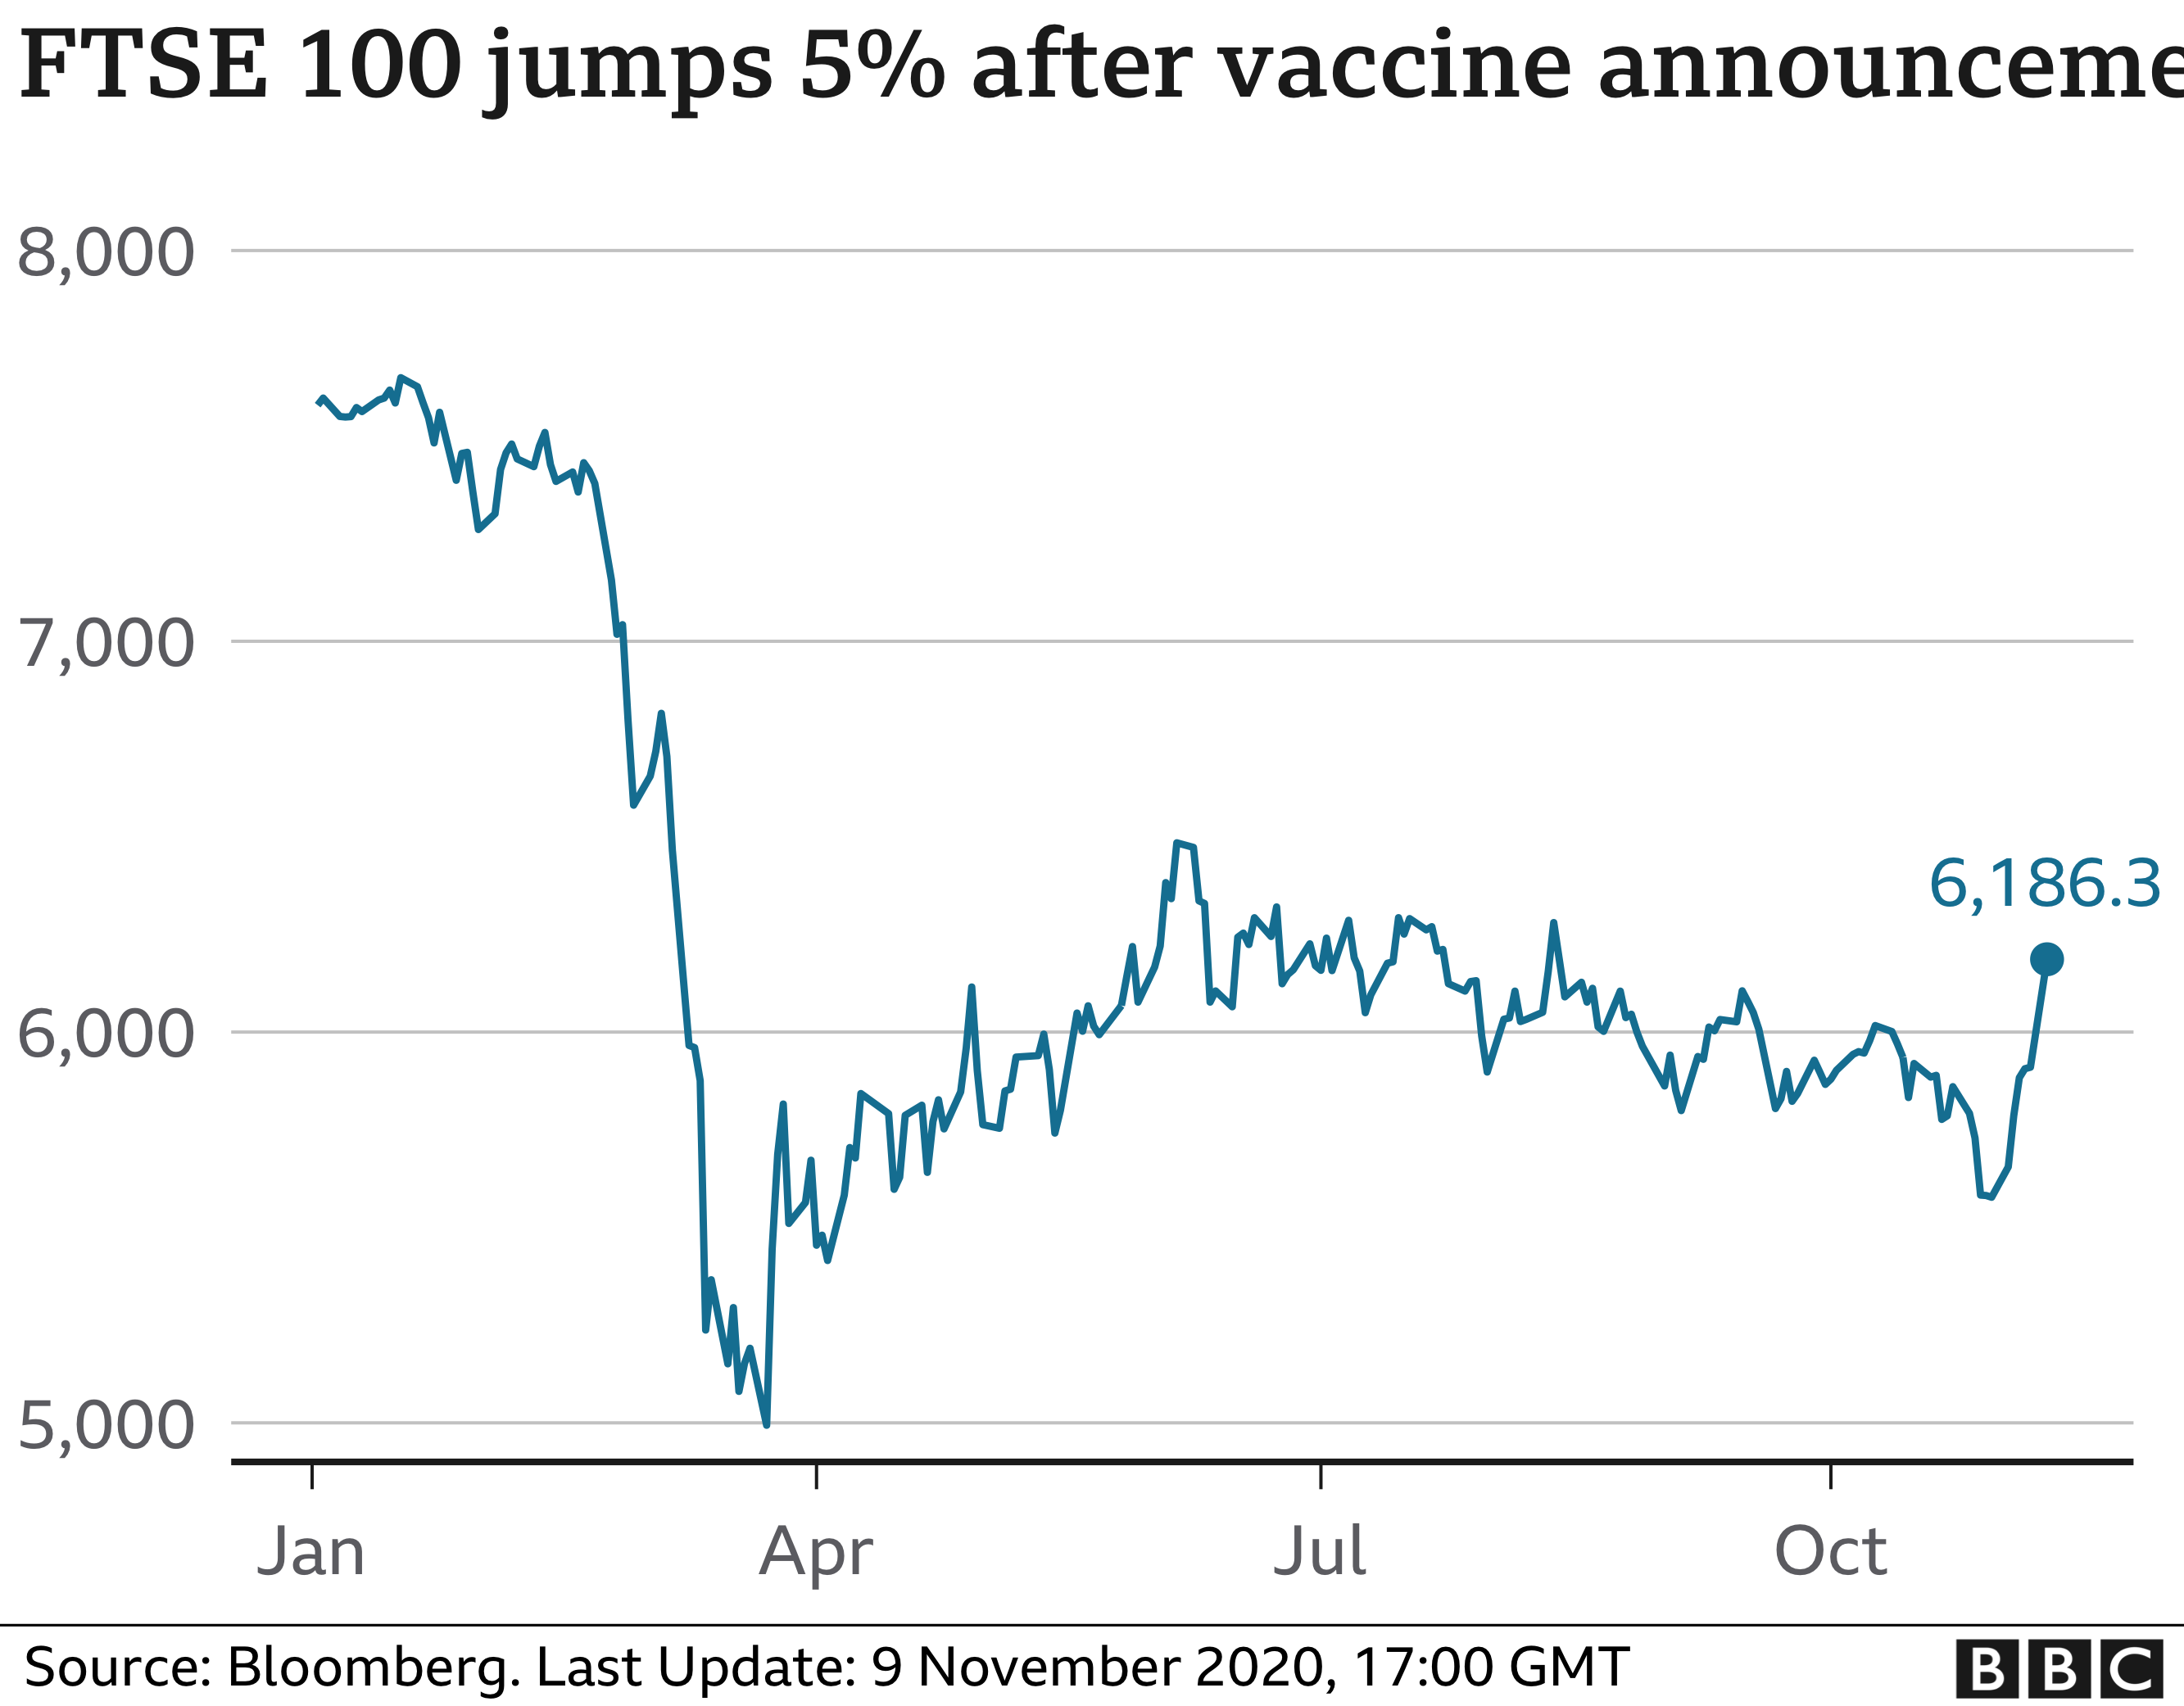 A BBC graph showing the FTSE 100 jumping by 5% after the coronavirus vaccine announcement